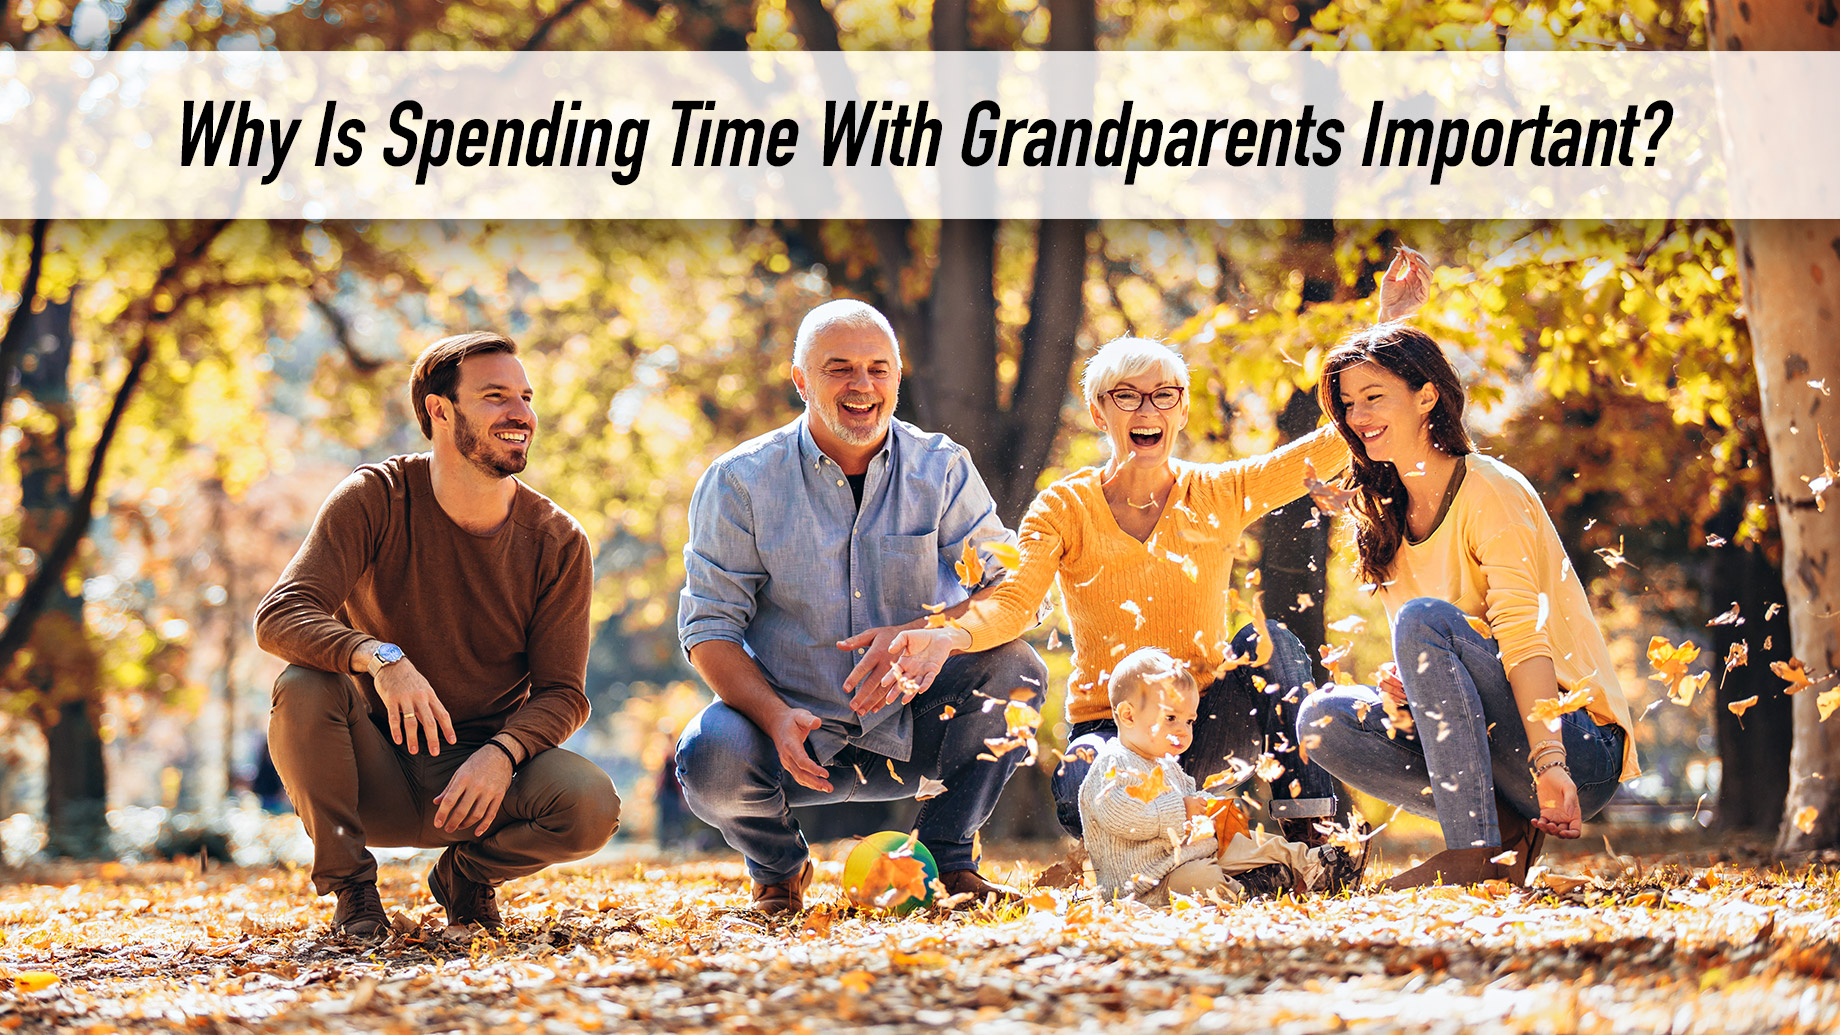 Why Is Spending Time With Grandparents Important?